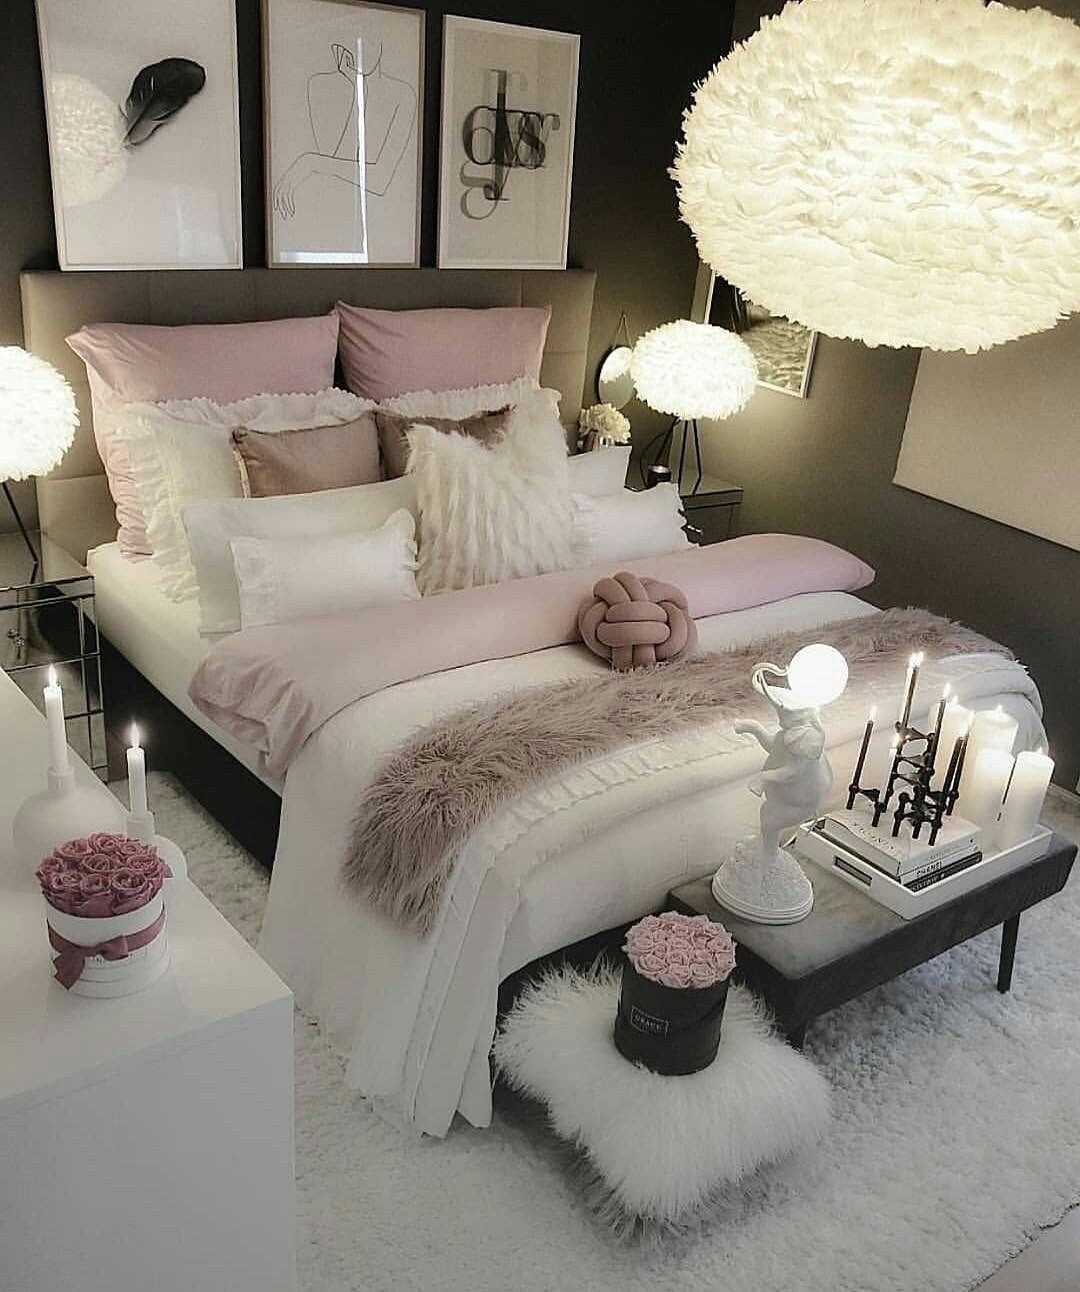 30 Teen Girl Bedroom Decor Ideas - The Wonder Cottage -   17 beauty for bedrooms ideas